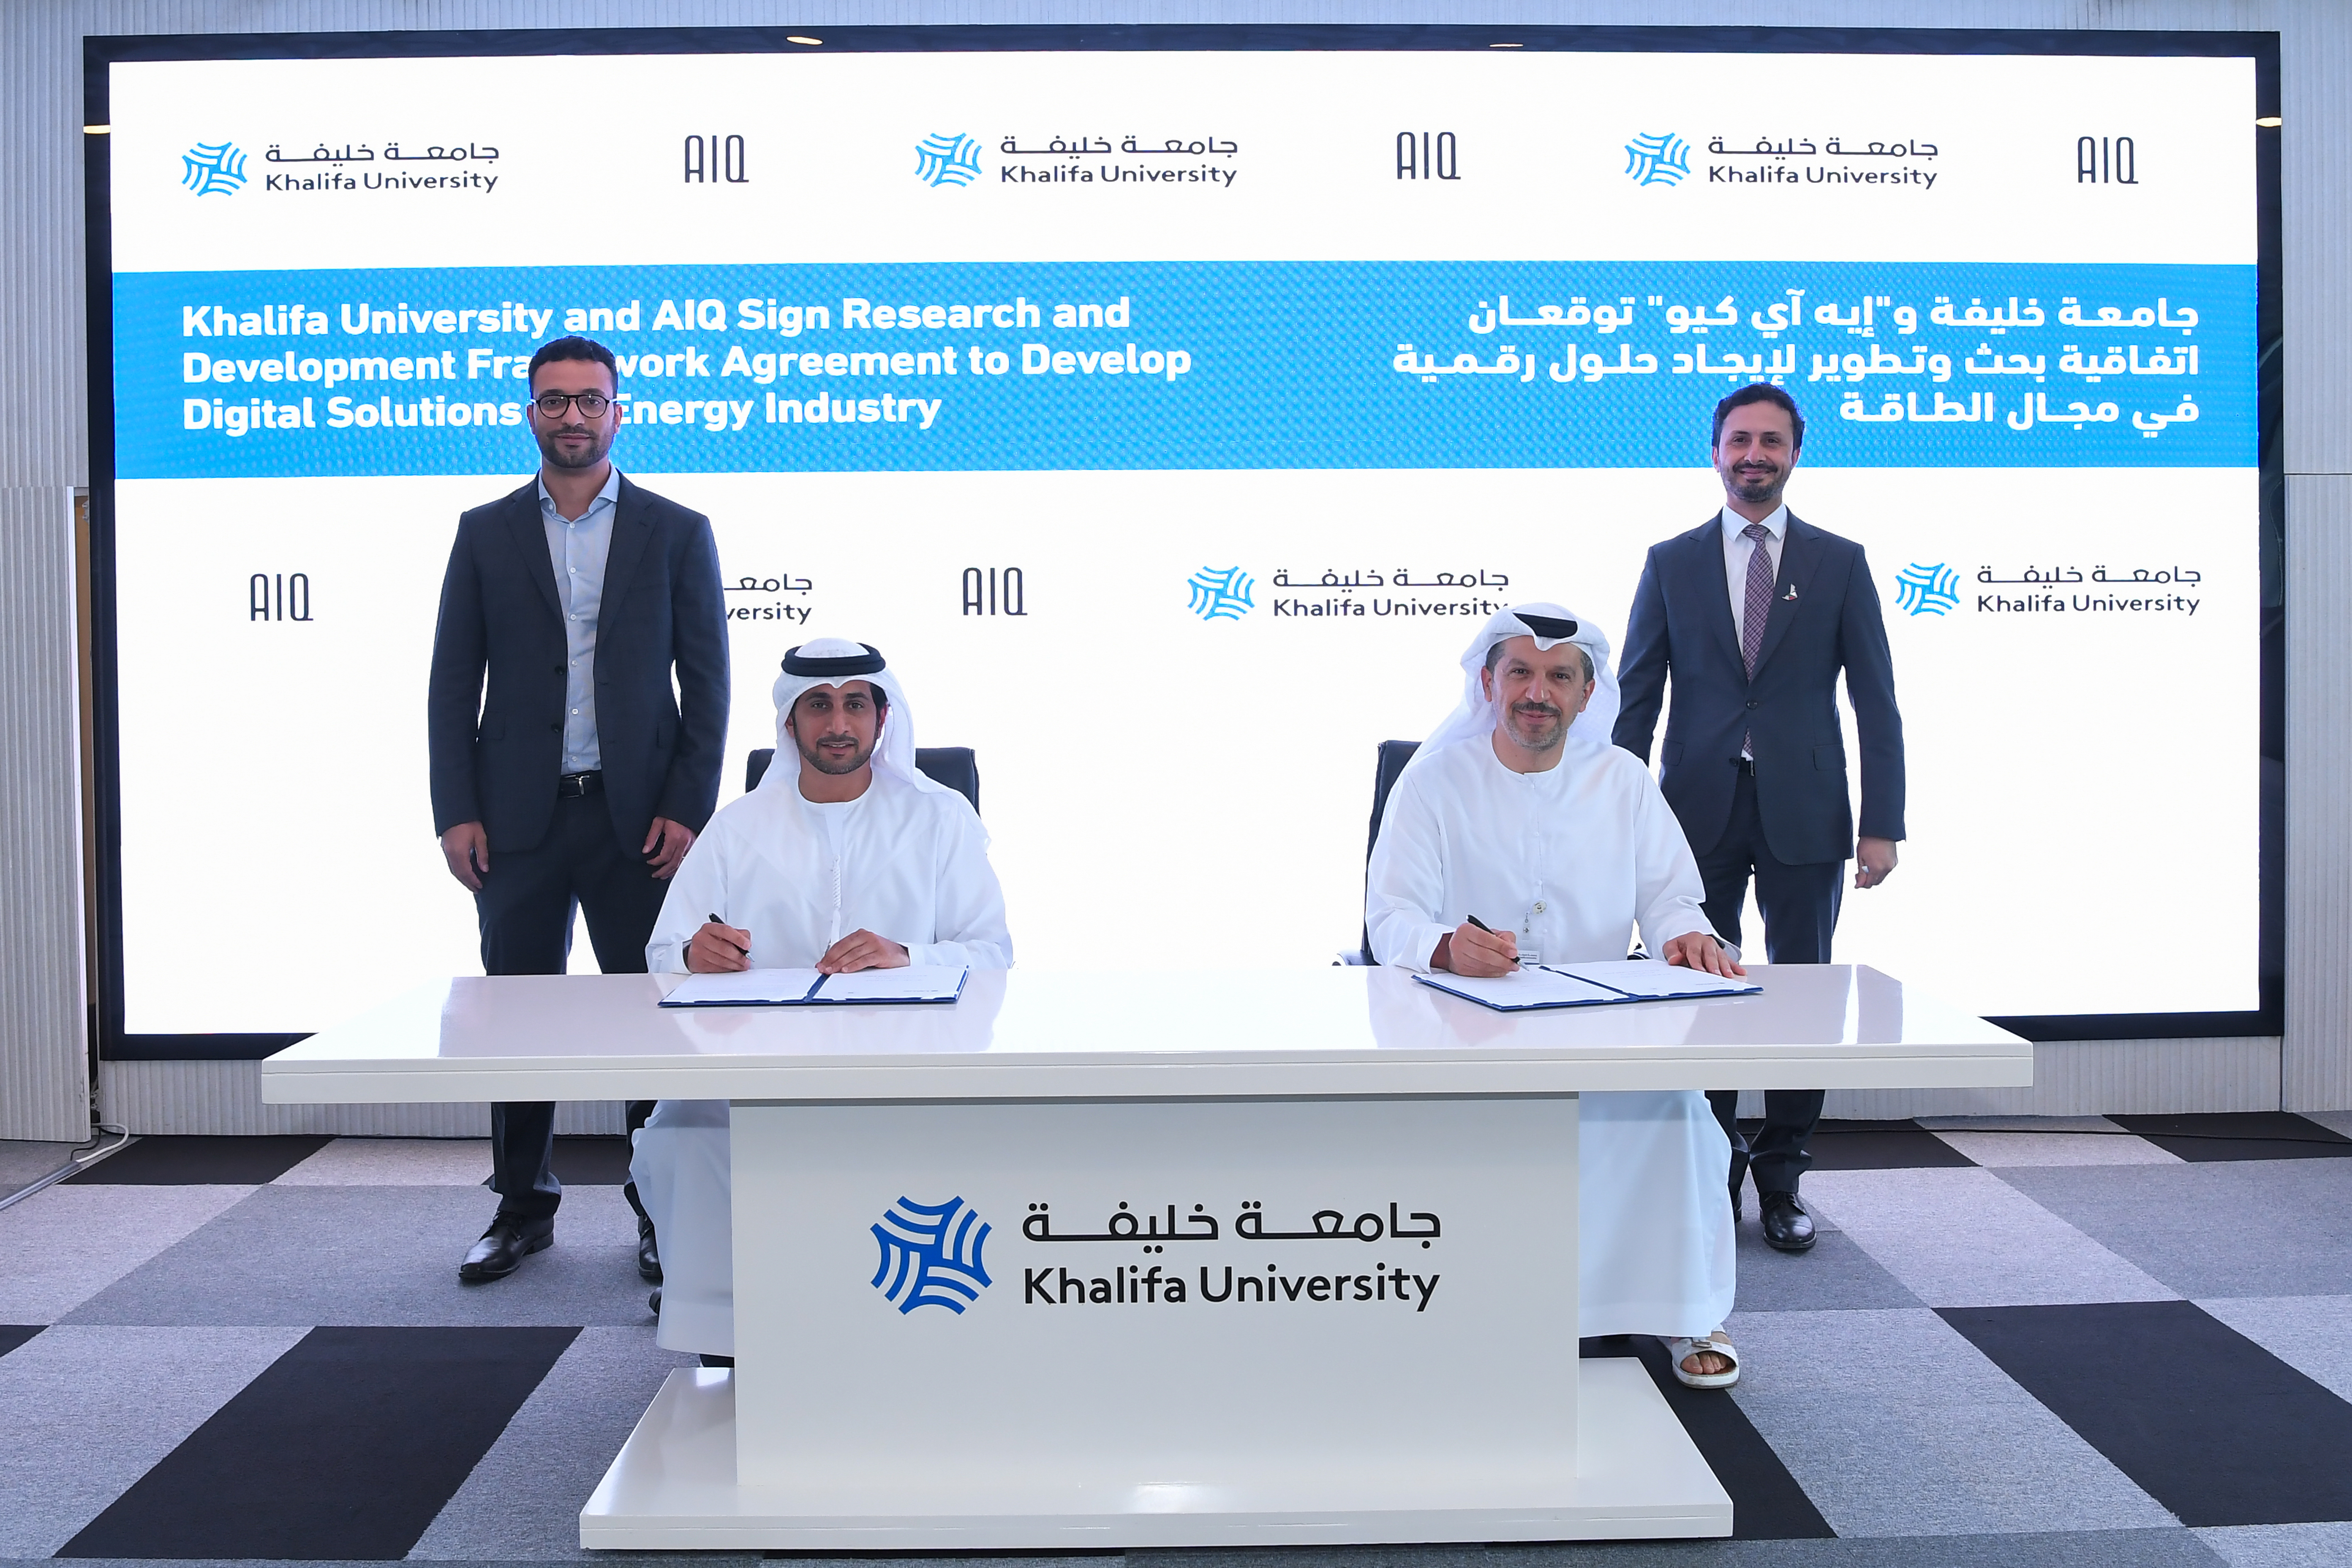 Khalifa University and AIQ Sign Research and Development Framework Agreement to Develop Digital Solutions for Energy Industry